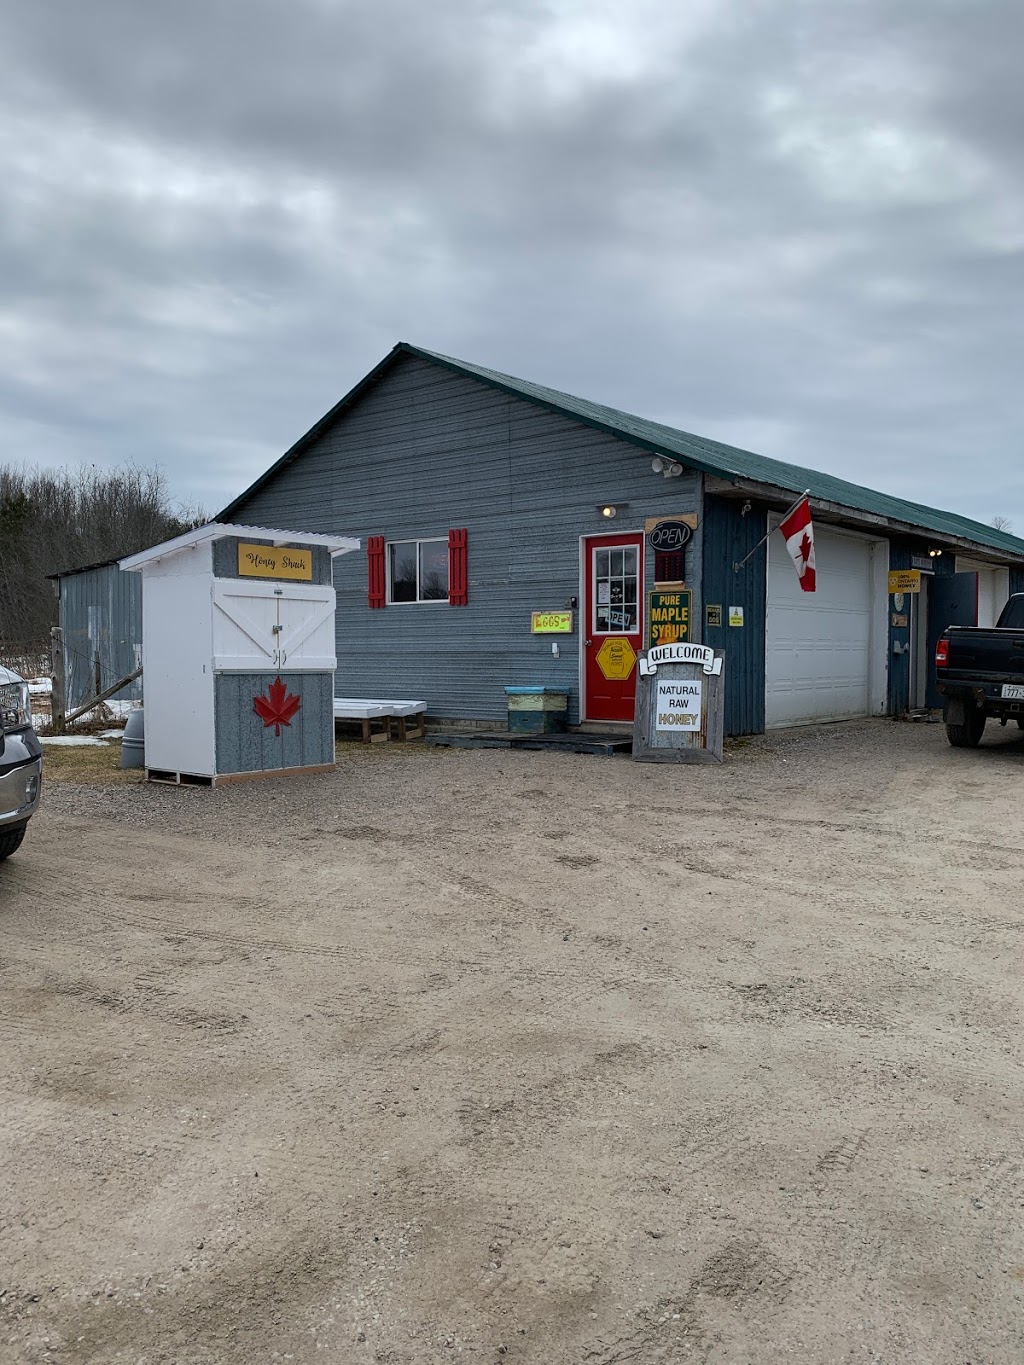 Turnview Farm | store | 6424 ON-93, Elmvale, ON L0L 1P0, Canada | 7056273378 OR +1 705-627-3378